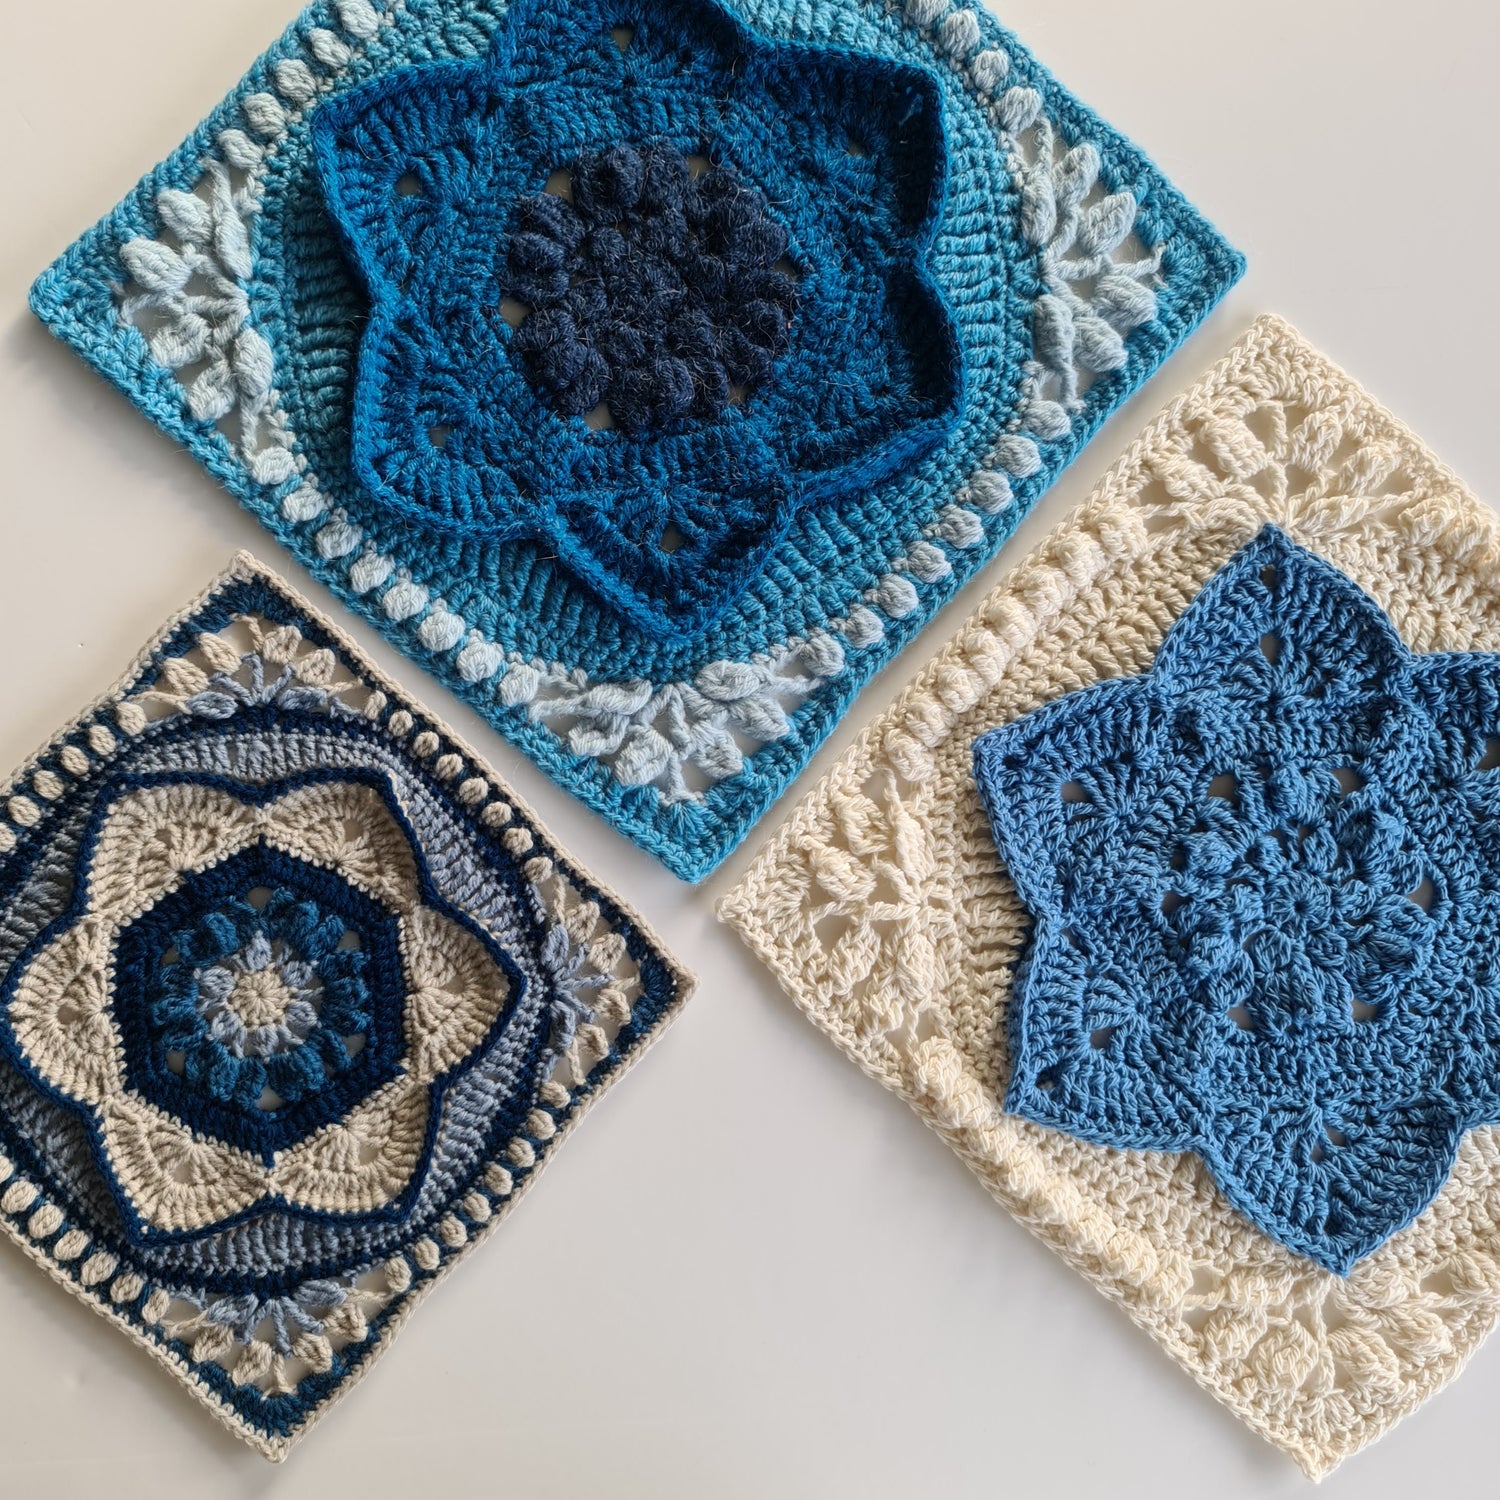 3 different versions of the floral granny square in various blues Asterales Crochet Granny Square Pattern by Shelley Husband